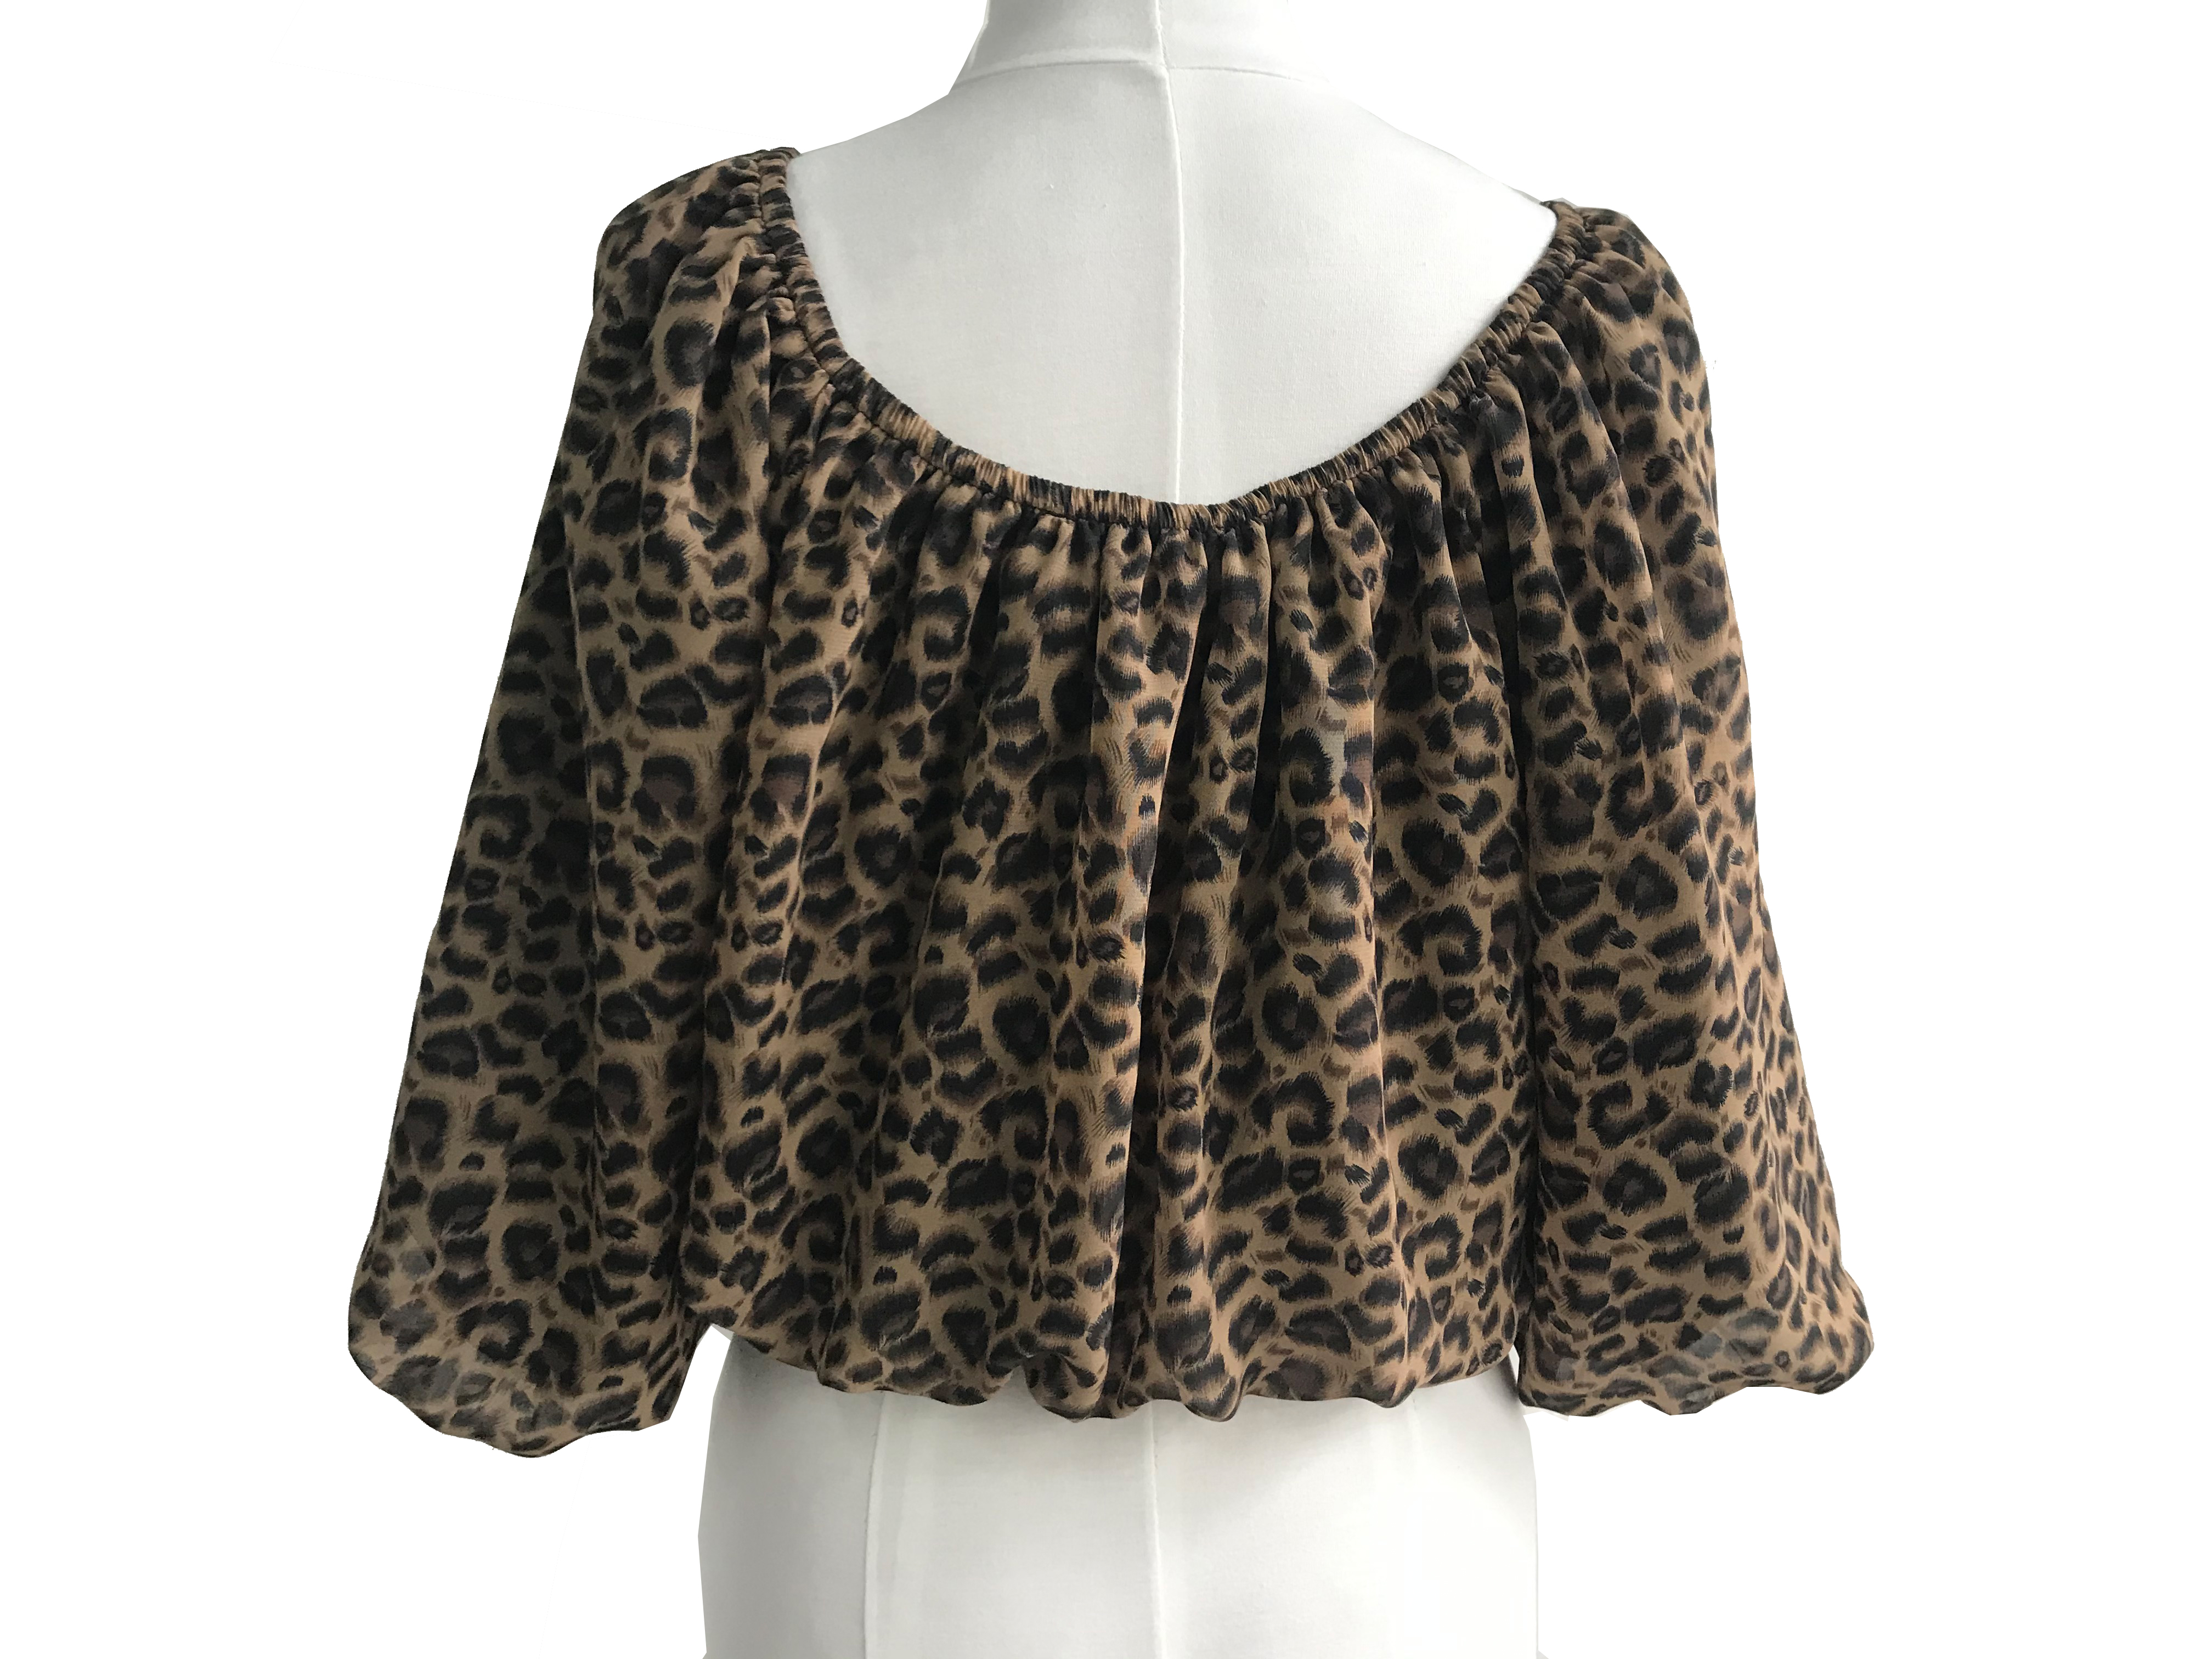 Leopard print pleated pullover/fashion top/lady tops/base top/woman top